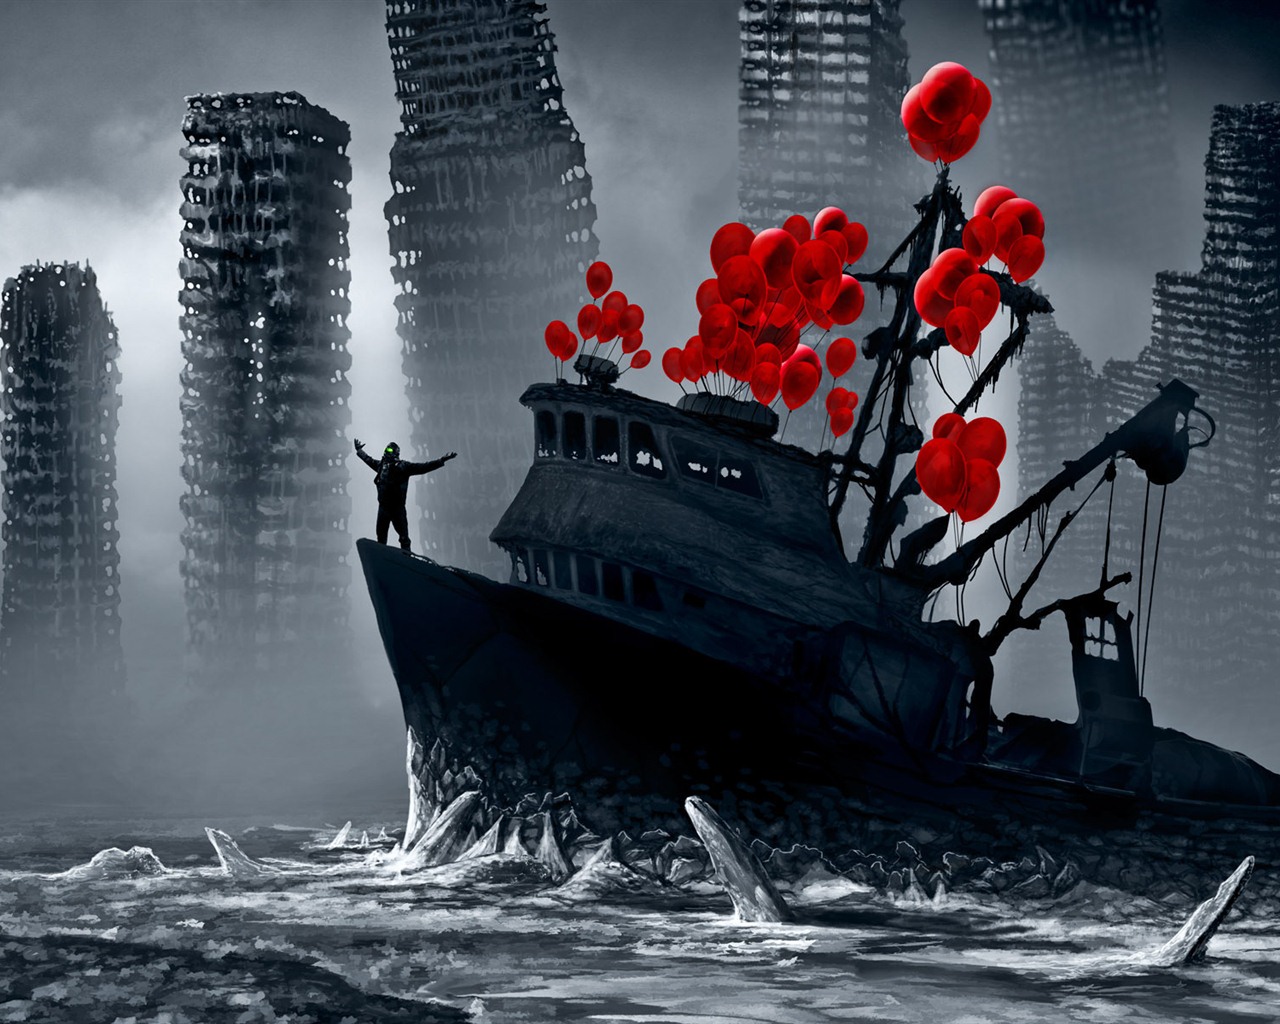 Romantically Apocalyptic creative painting wallpapers (2) #19 - 1280x1024